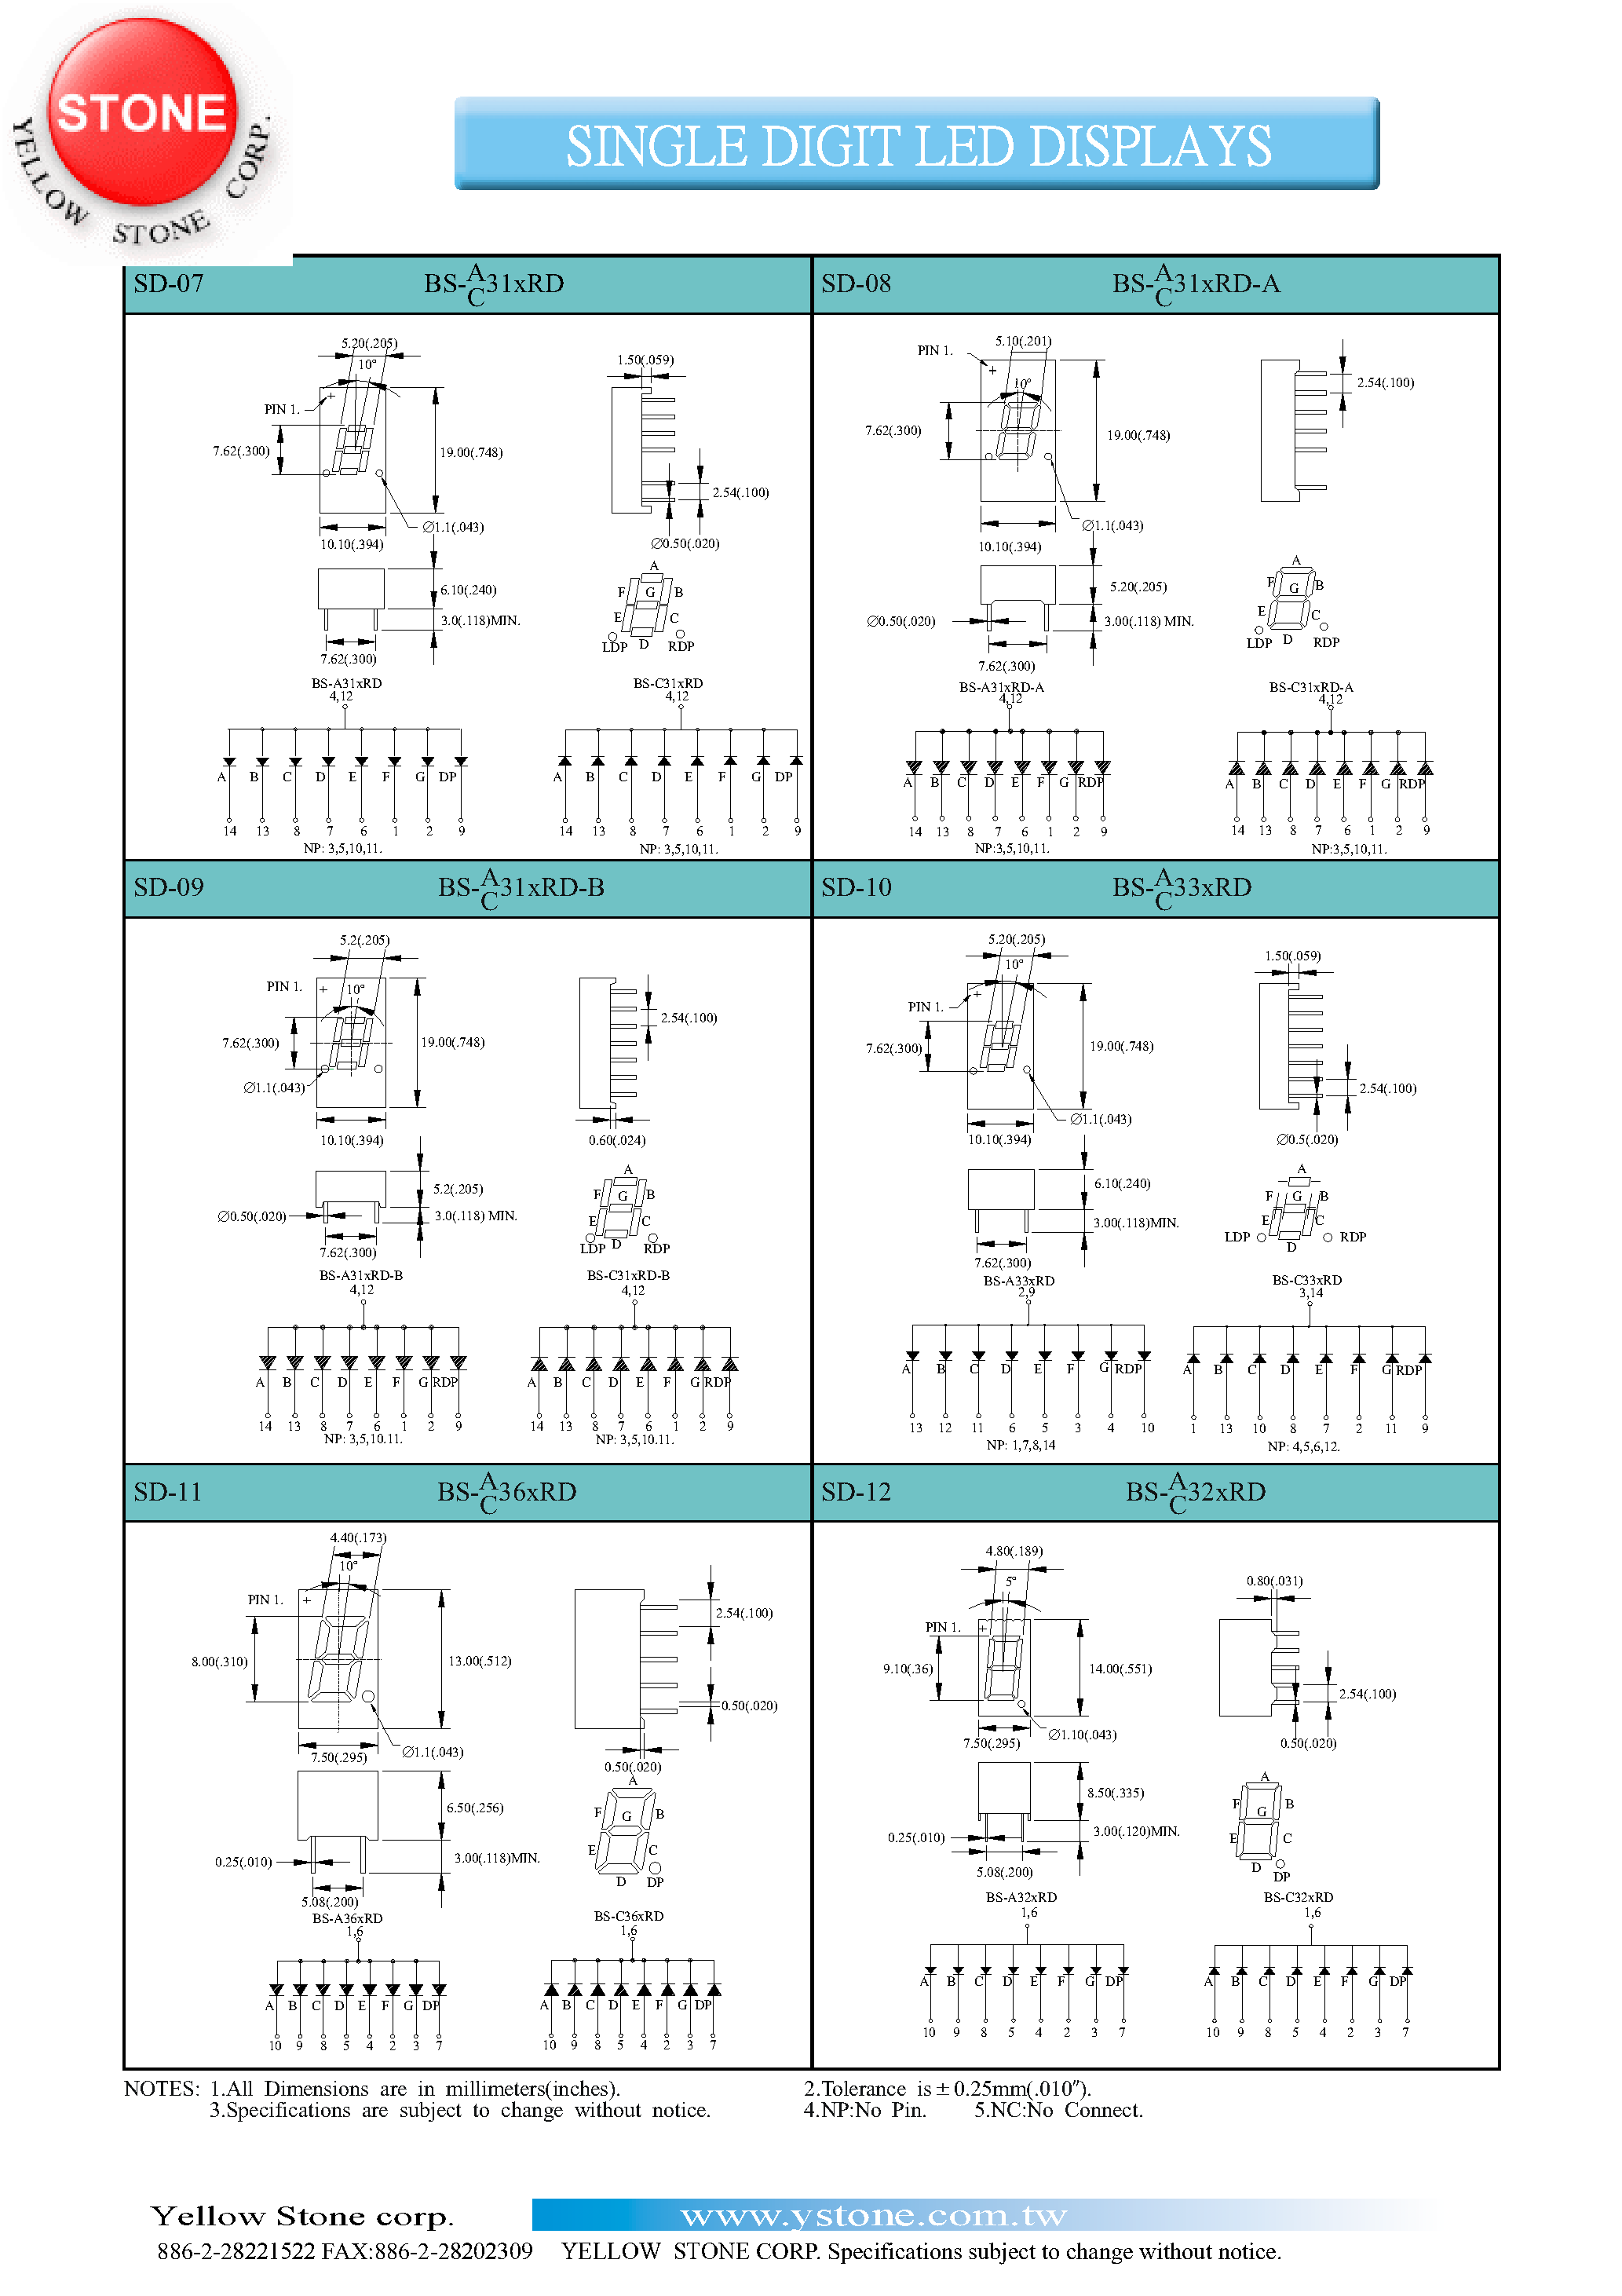 Datasheet BS-A316RD-B - SINGLE DIGIT LED DISPLAYS page 2